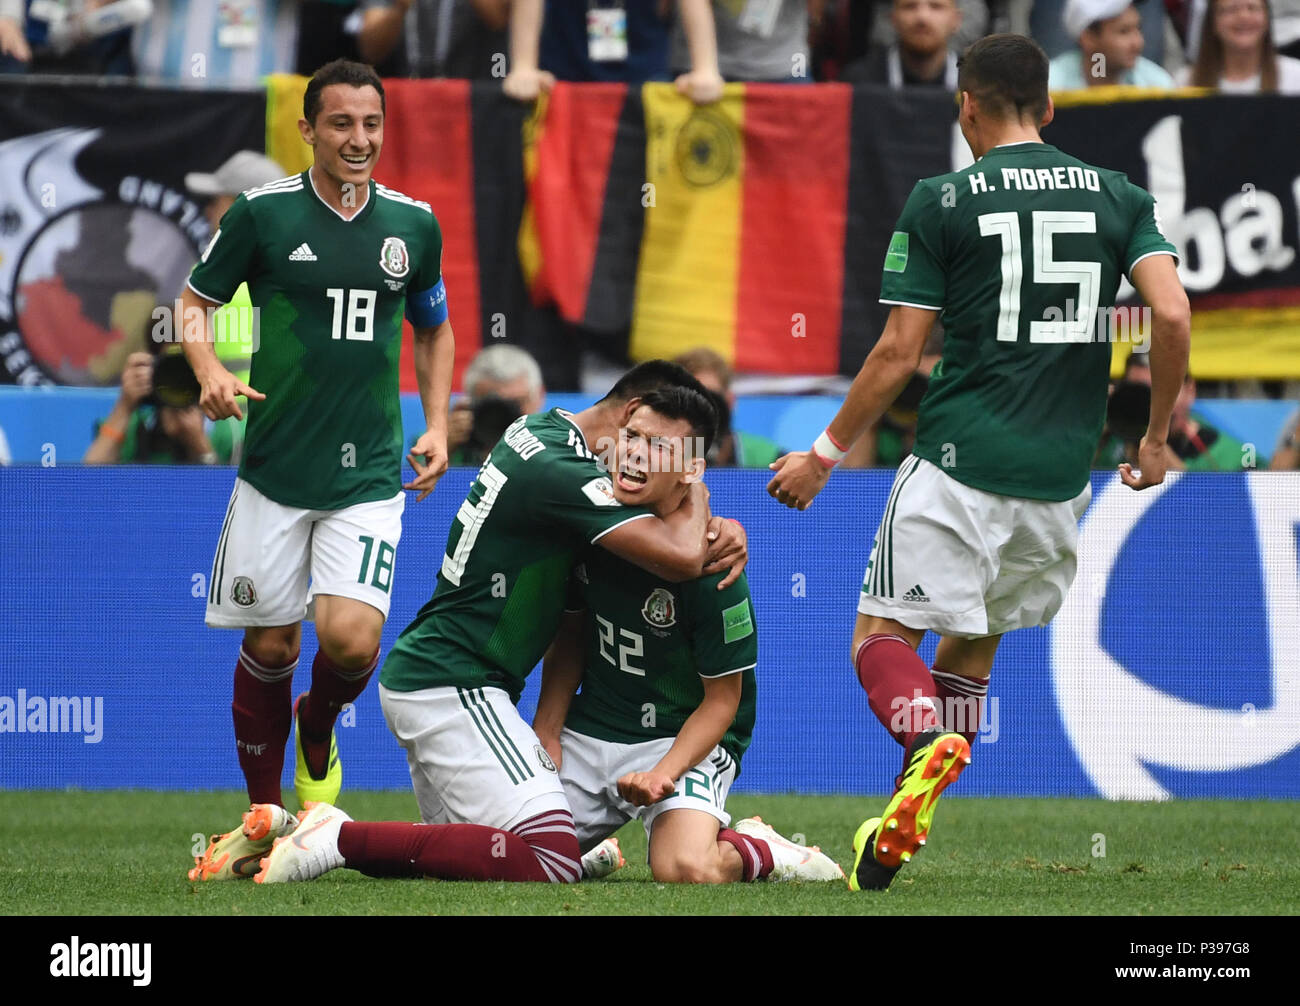 17 June 2018, Russia, Moscow, Soccer, FIFA World Cup, Group F, Matchday 1 of 3, Germany vs Mexico at the Luzhniki Stadium: Hirving Lozano of Mexico cheers over his 1-0 score with Jesus Gallardo (C), Andres Guardado (L) and Hector Moreno. Photo: Ina Fassbender/dpa Stock Photo